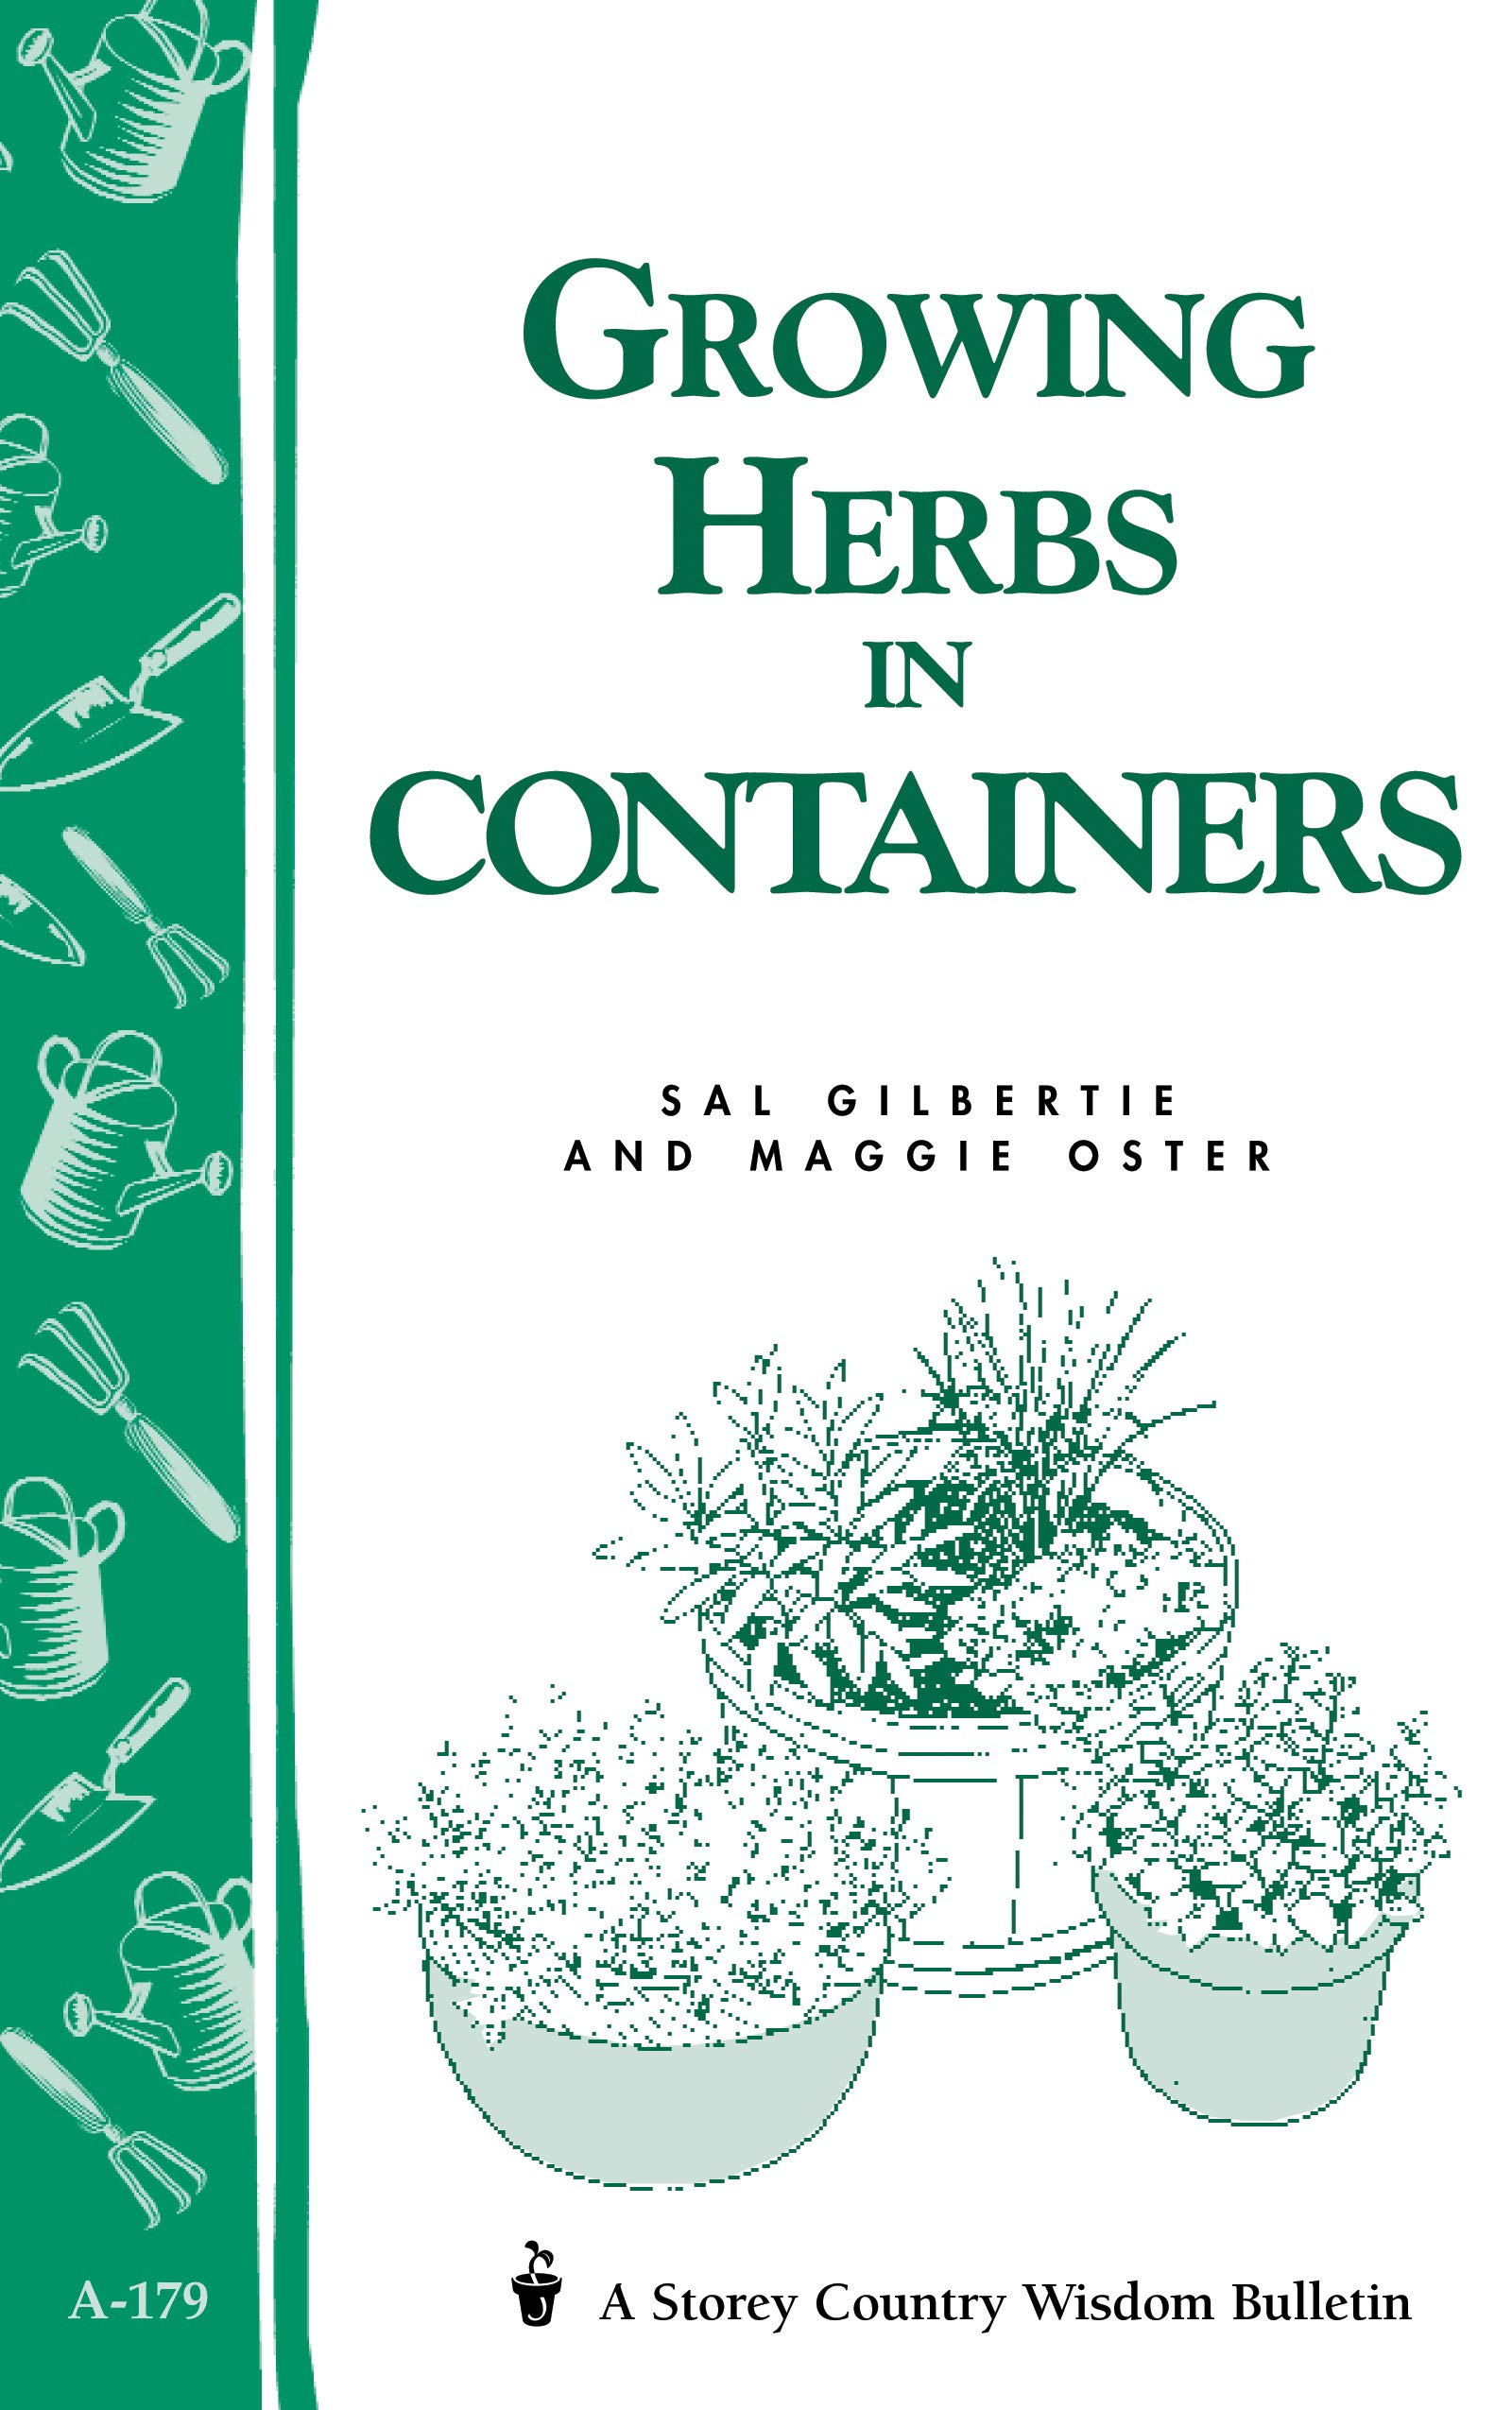 Growing Herbs in Containers: Storey's Country Wisdom Bulletin A-179 (Storey Country Wisdom Bulletin)